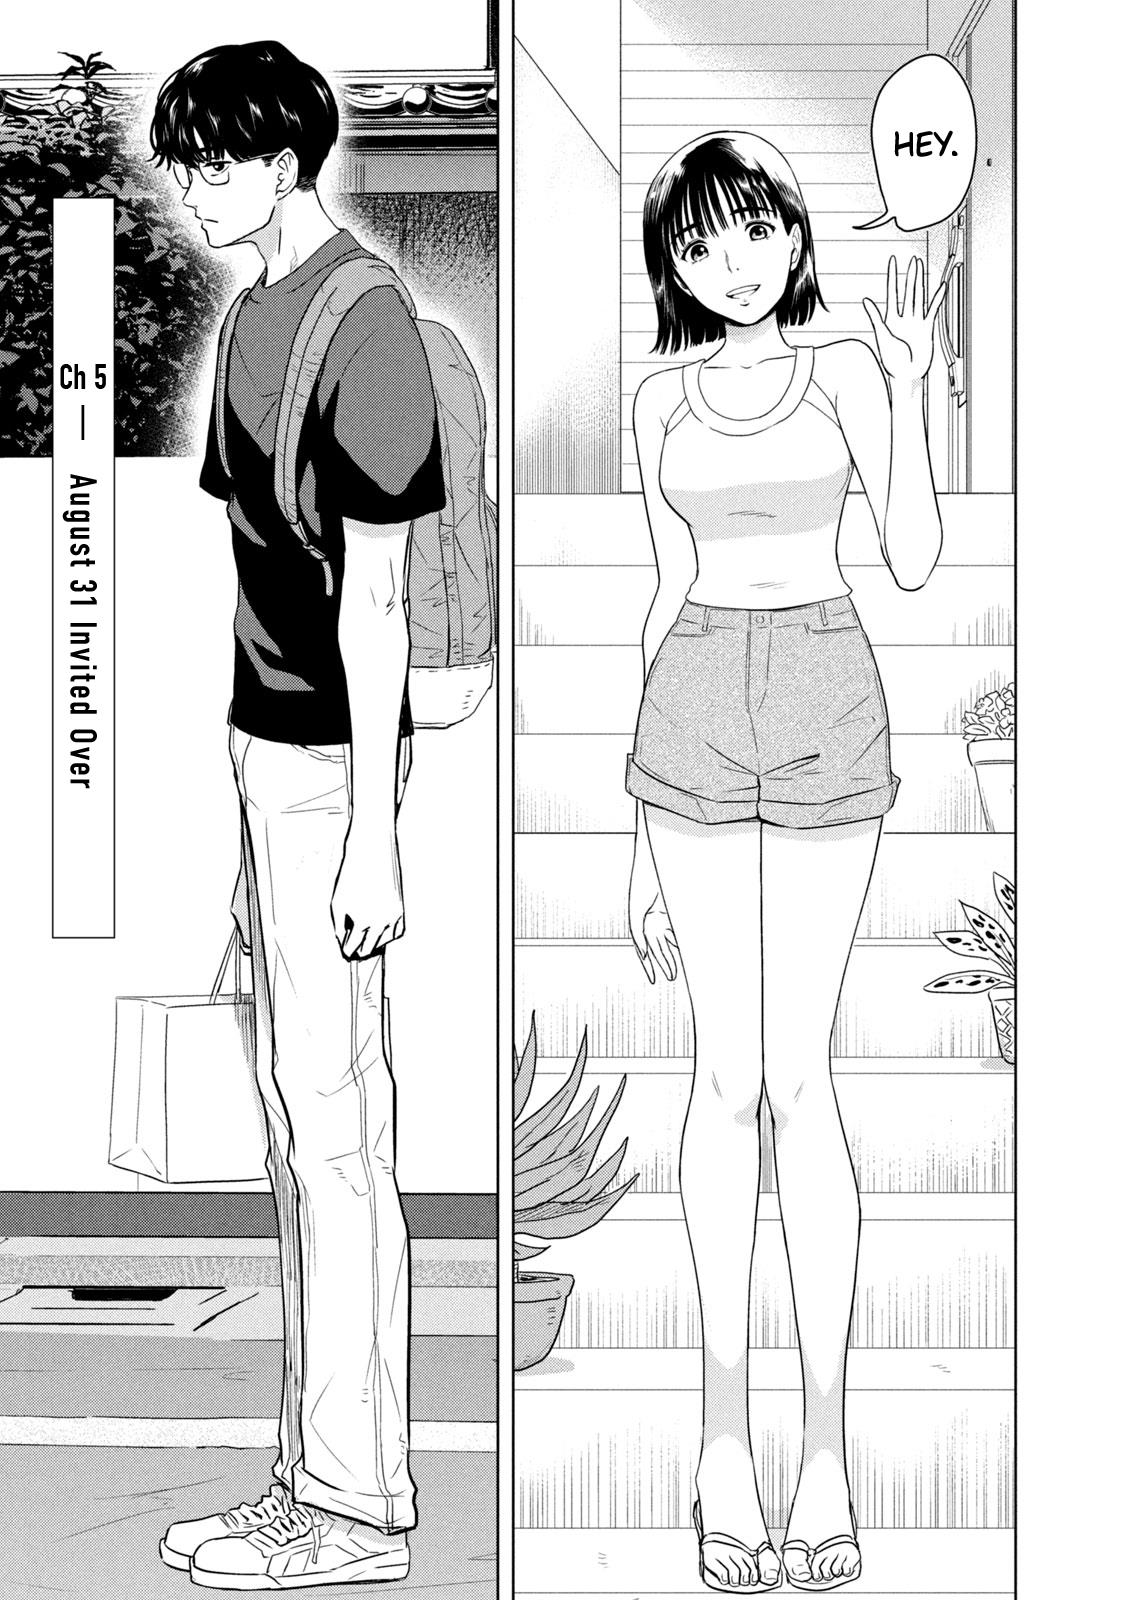 8-Gatsu 31-Nichi No Long Summer Vol.1 Chapter 5: August 31 Invited Over - Picture 1